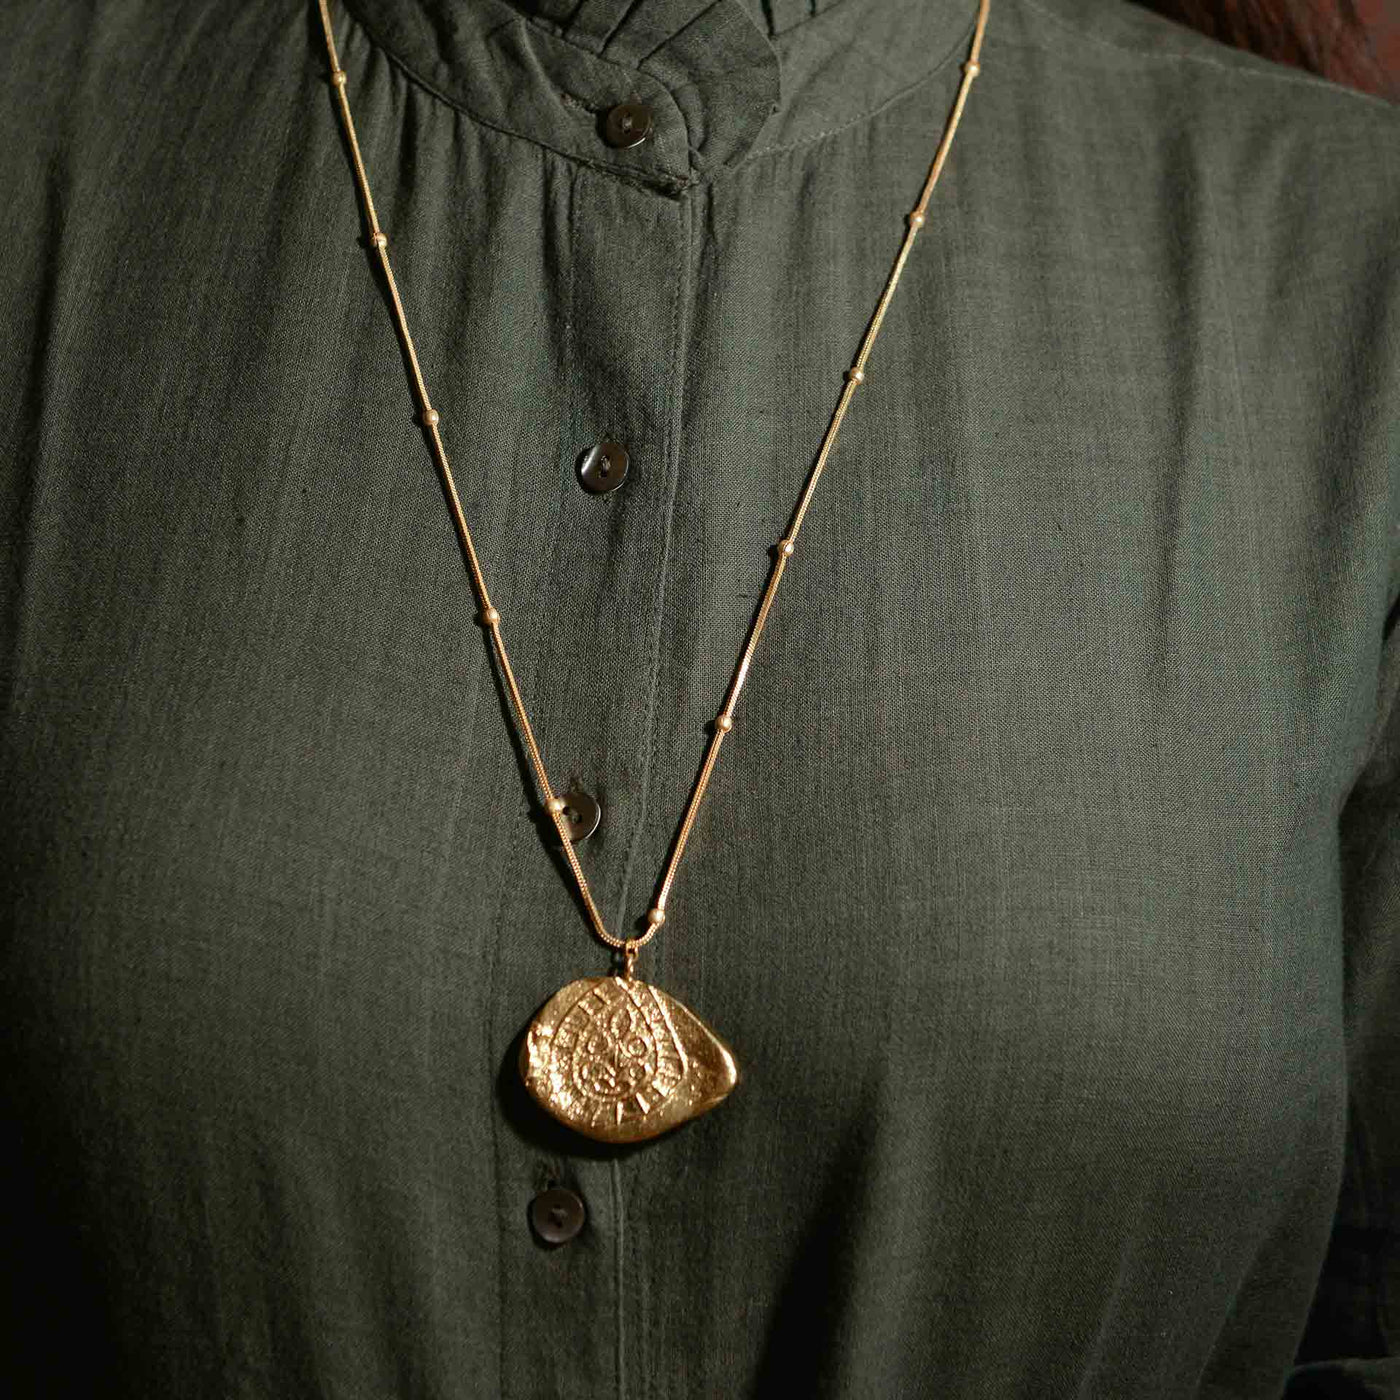 A dye gold pendant on a chain, which is made to resemble a fossil.